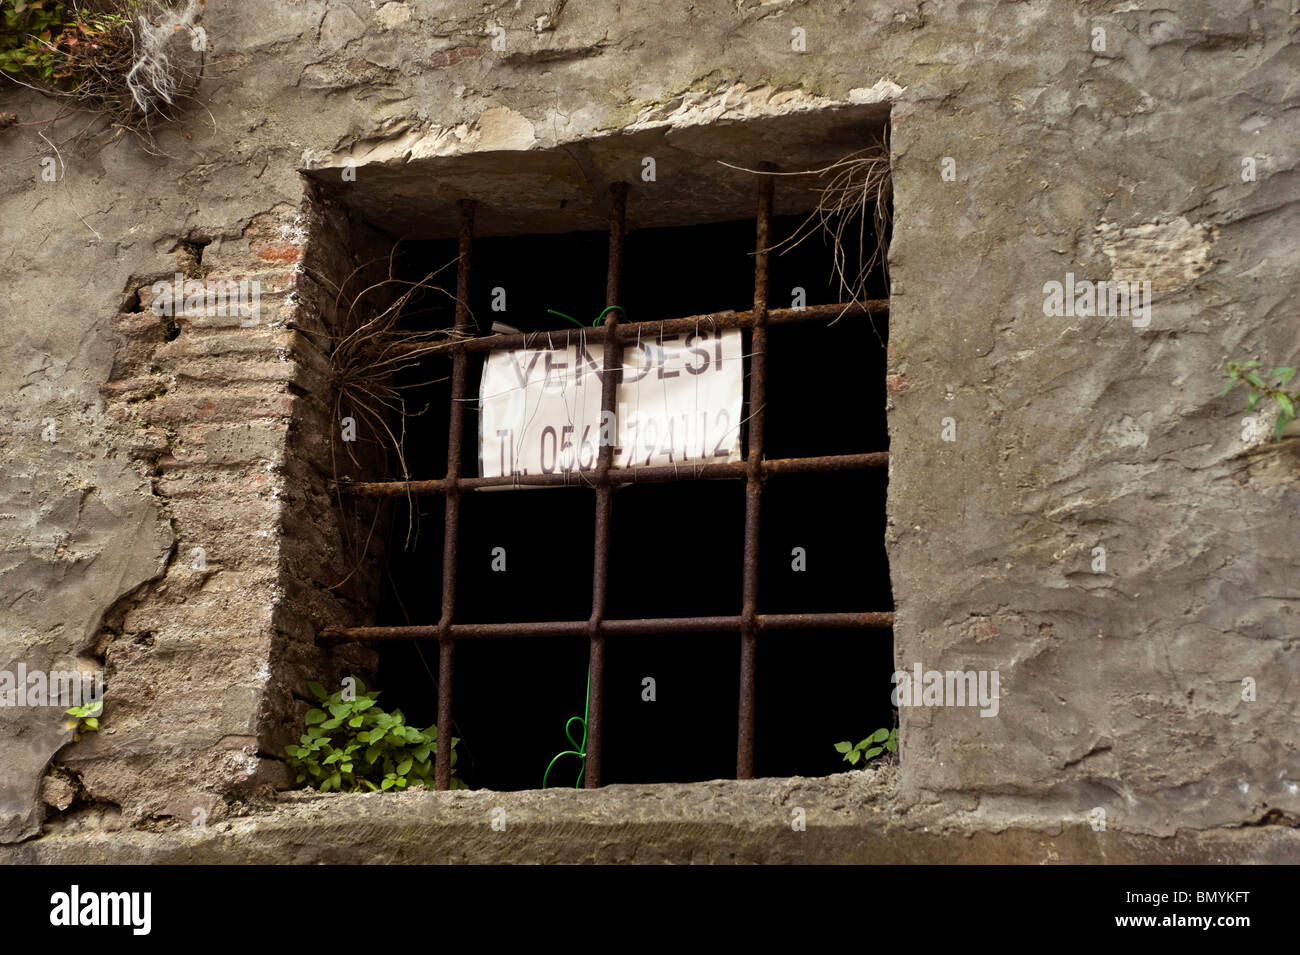 For Sale sign in the barred window of an old building in Tuscany Stock Photo